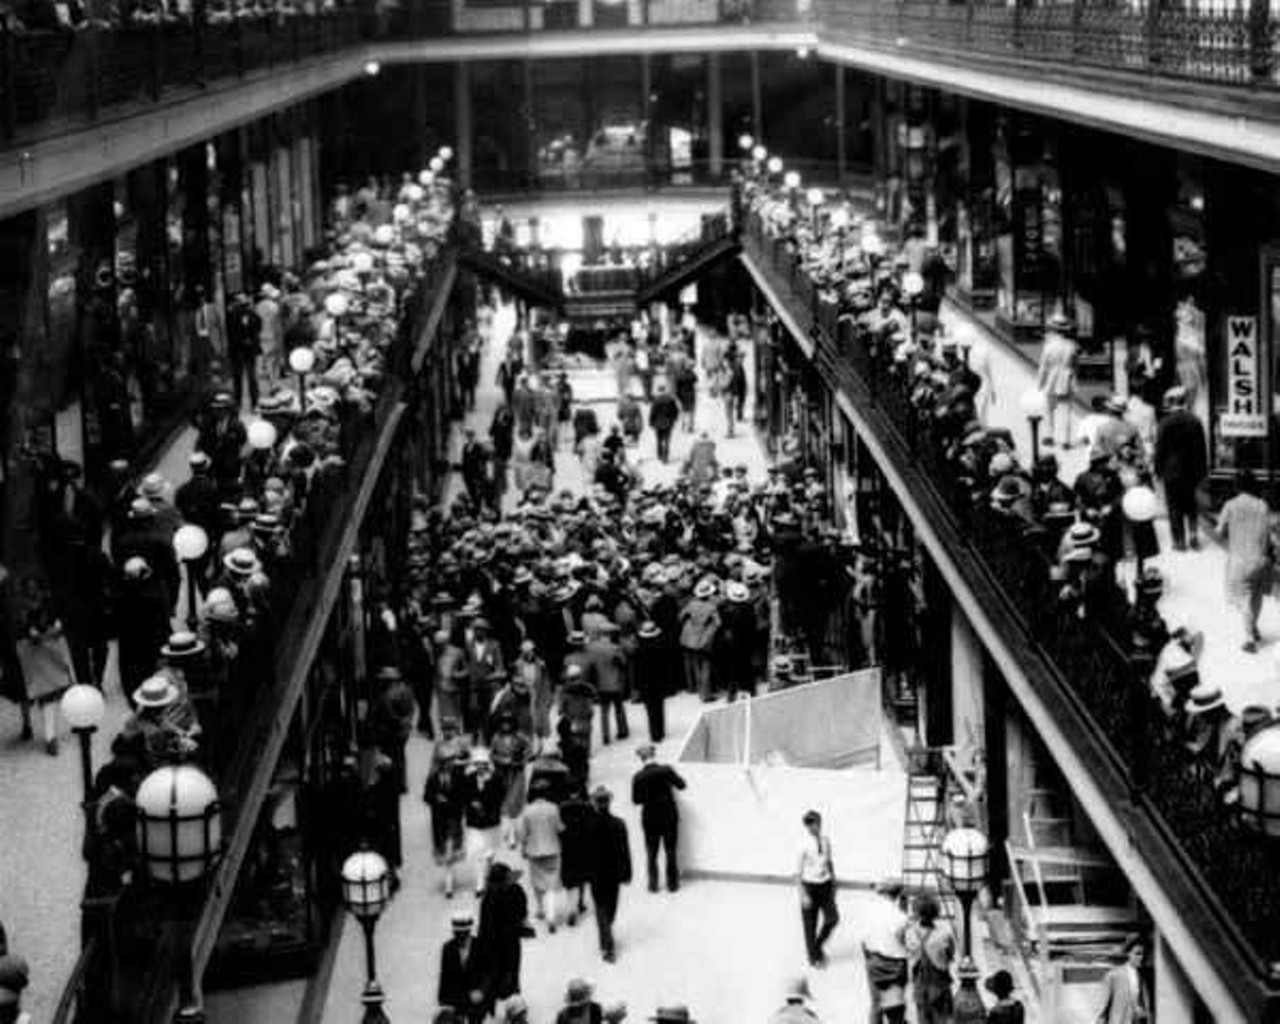 Interior view of The Arcade during an event, 1945